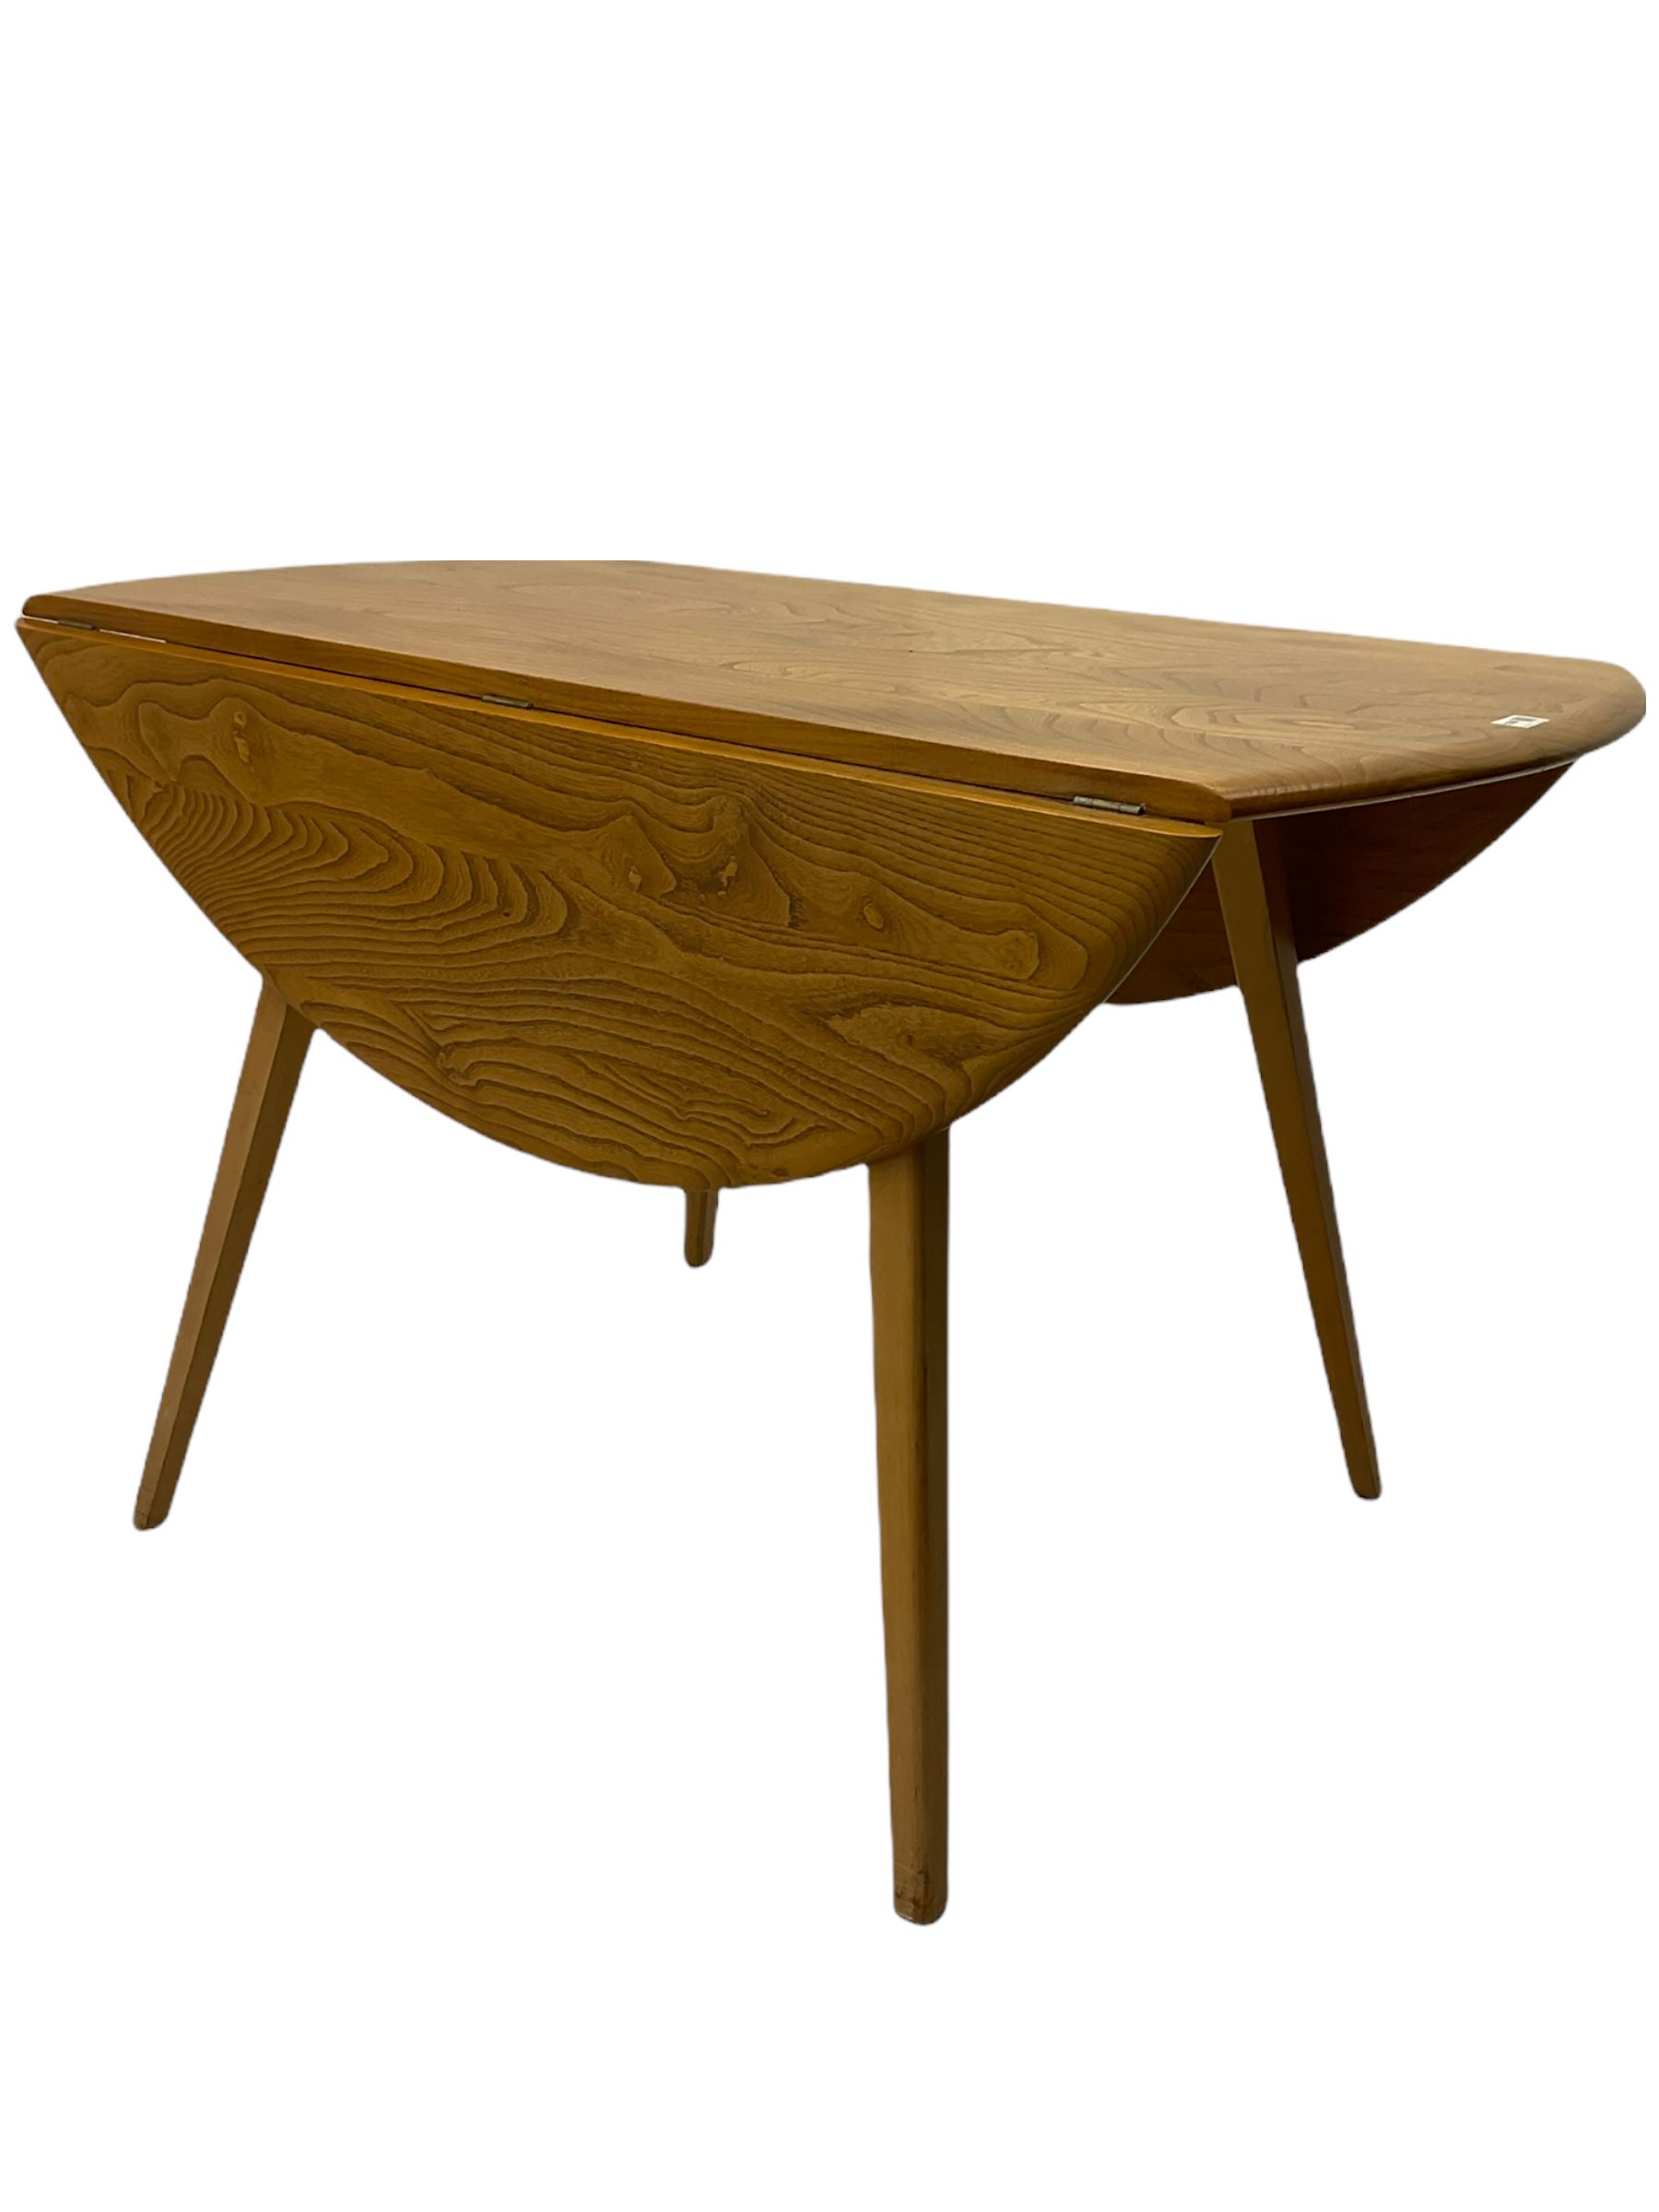 ercol elm and beech dining table - Image 5 of 15